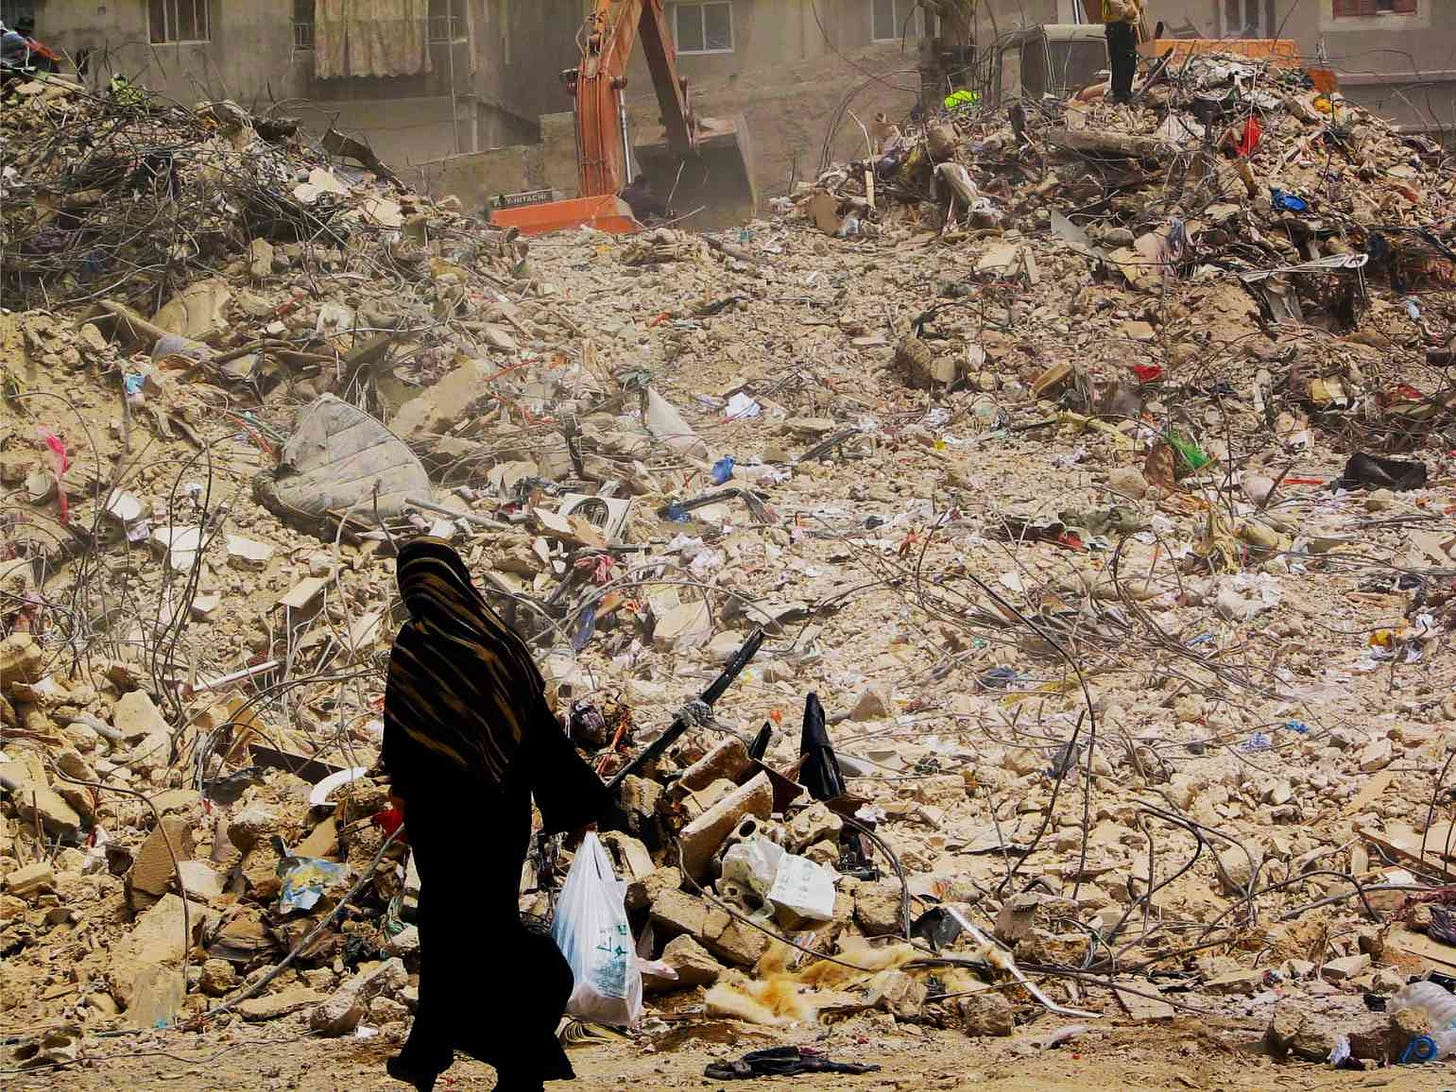 Muslim woman walking with grocery bag past hills of rubble in Shi'ite neighborhood of Southern Beirut, days after the ceasefire of 2006 Lebanon War. Photo by Constantine Markides